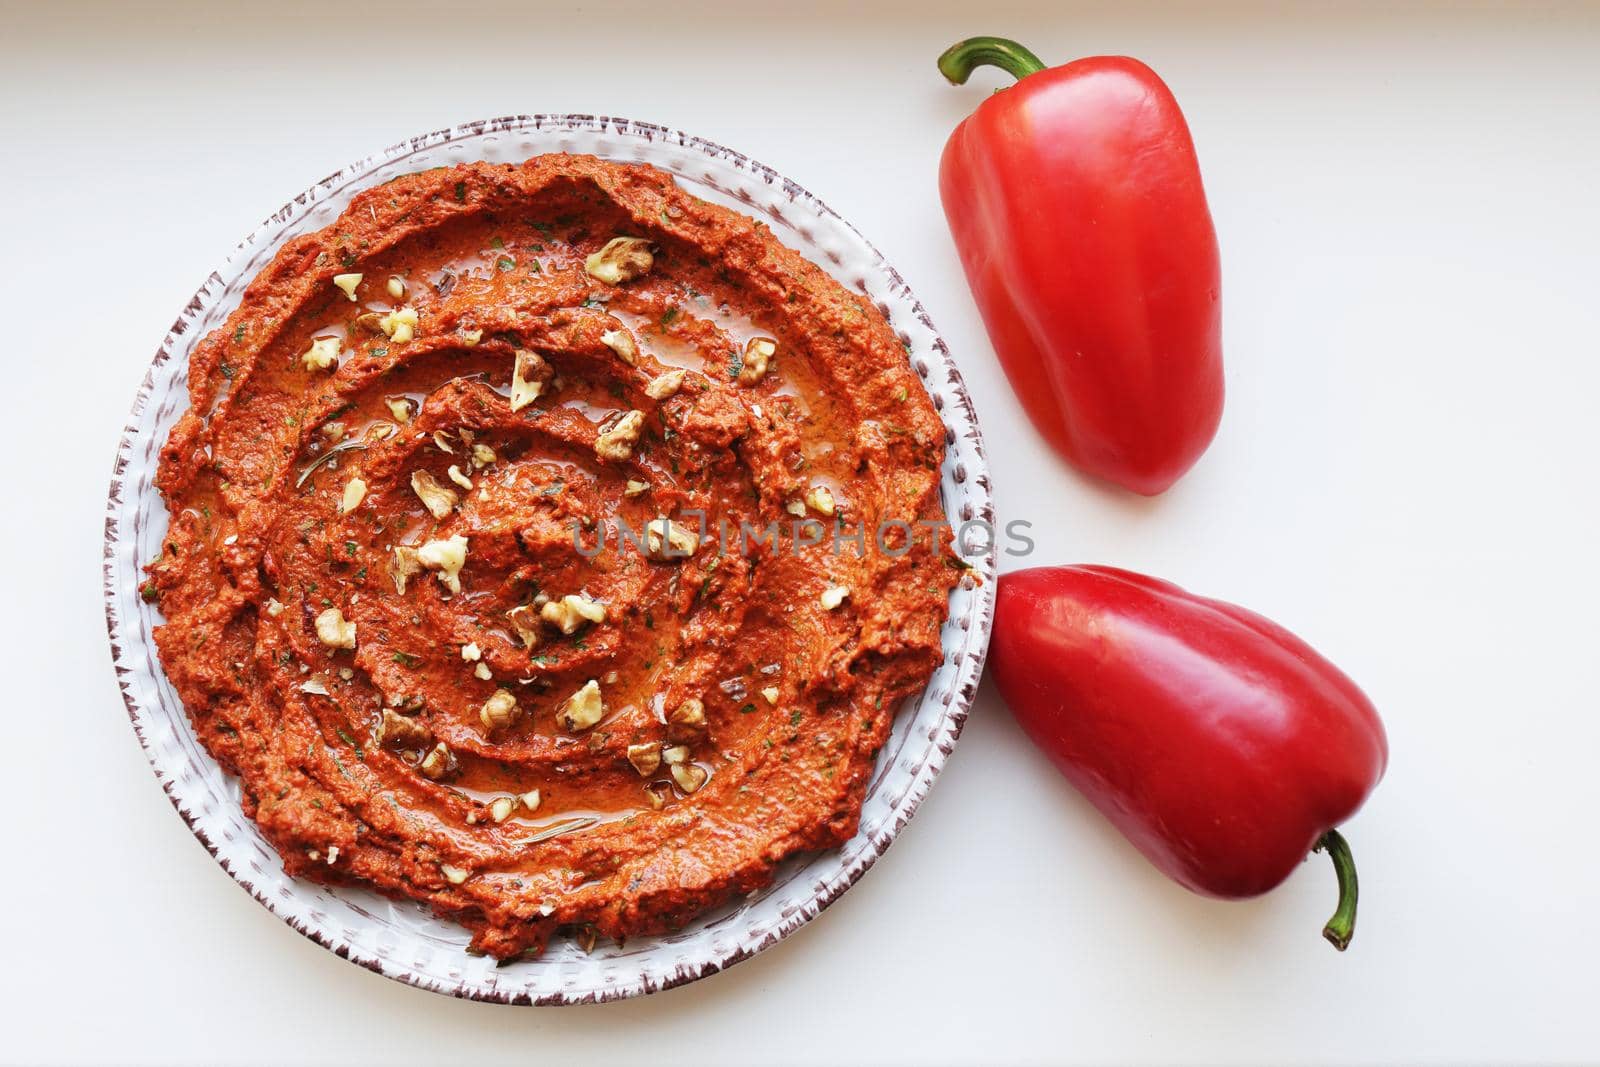 Muhammara, healthy walnut and roasted red bell pepper dip in a ceramic white plate by Proxima13